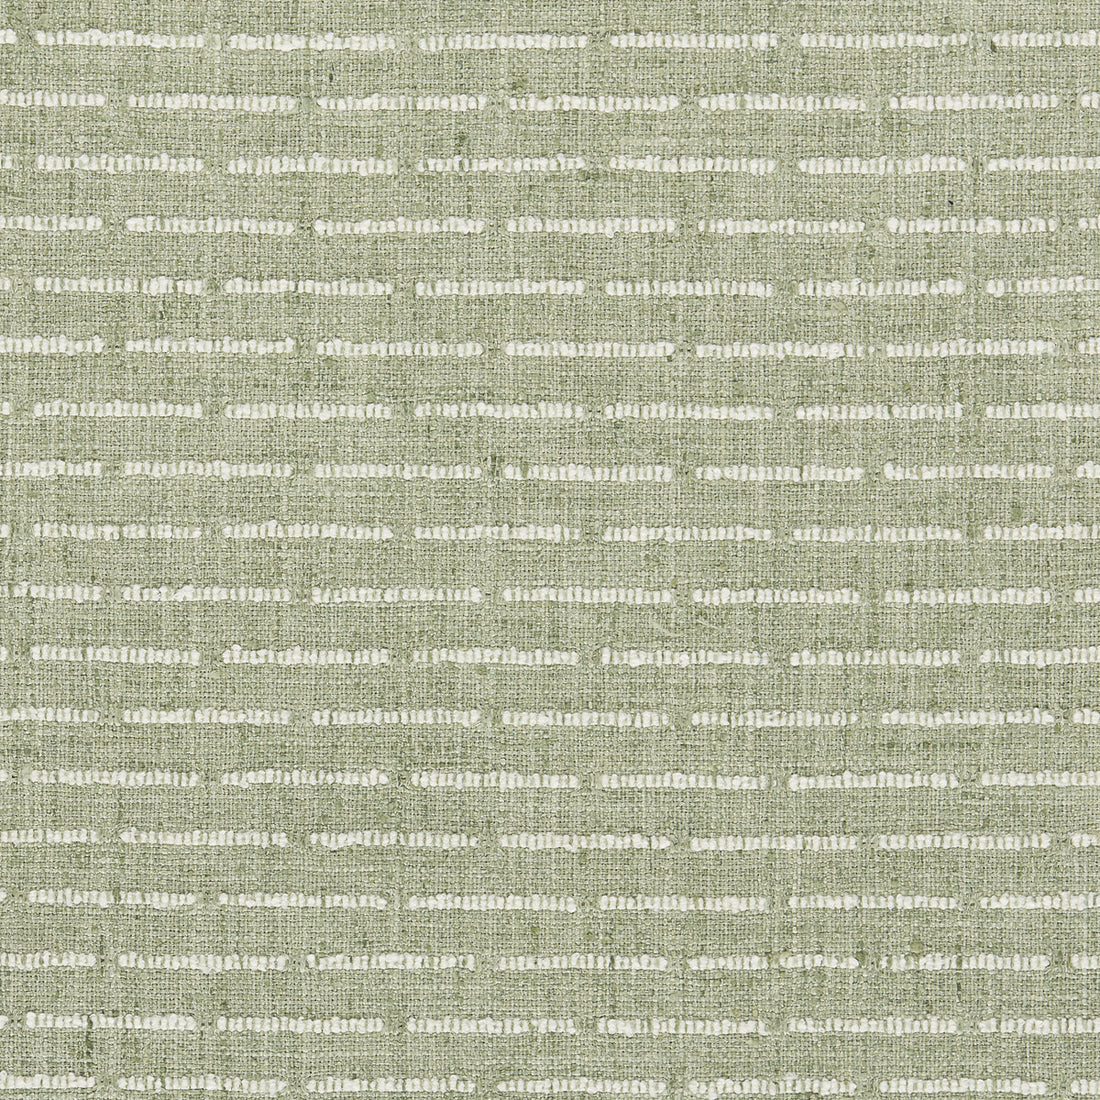 Kravet Basics fabric in 36528-31 color - pattern 36528.31.0 - by Kravet Basics in the Bungalow Chic II collection